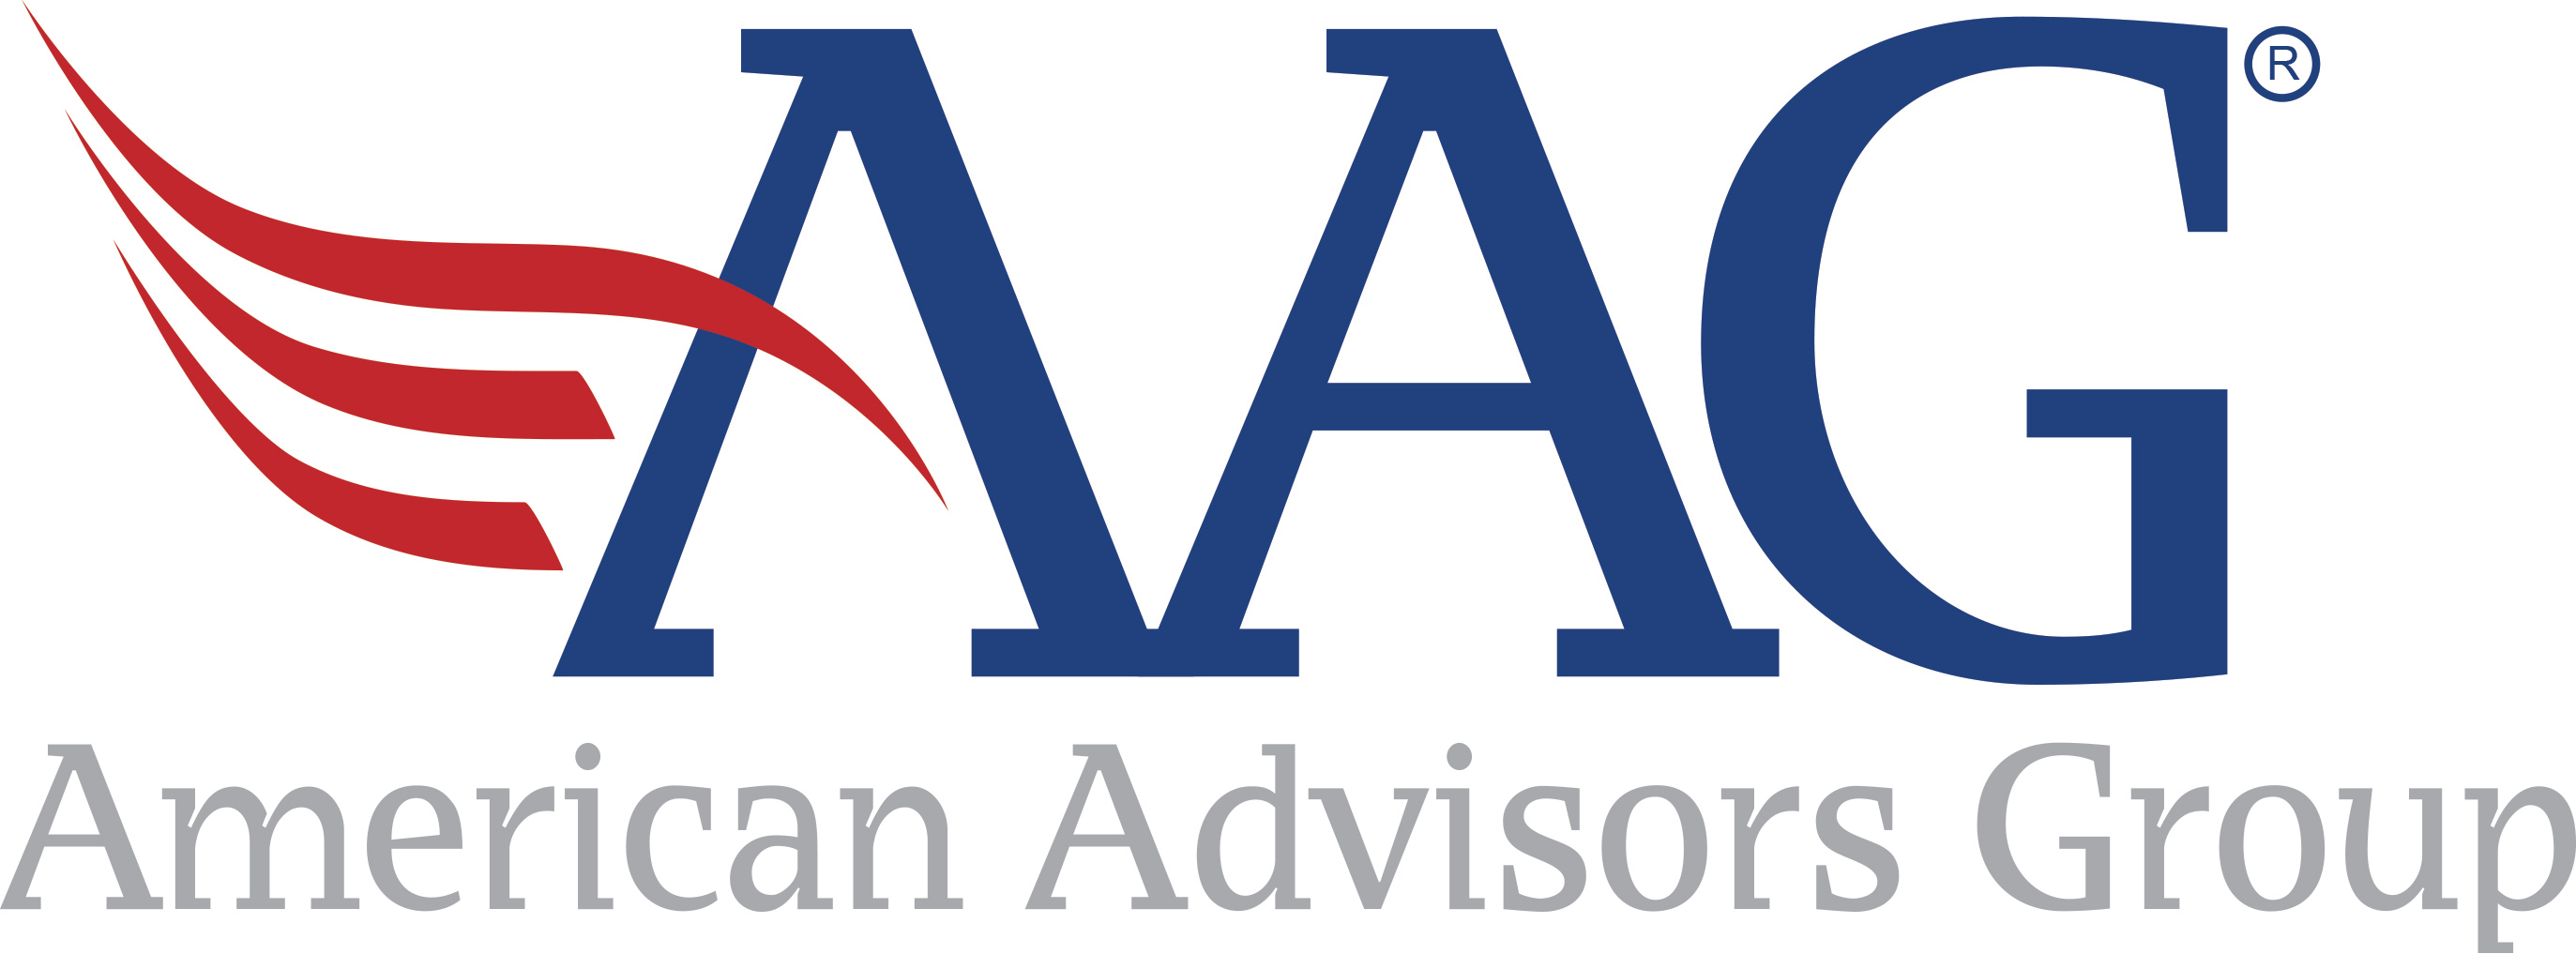 American Advisors Group (AAG) has premiered its first commercial for the Advantage jumbo reverse mortgage